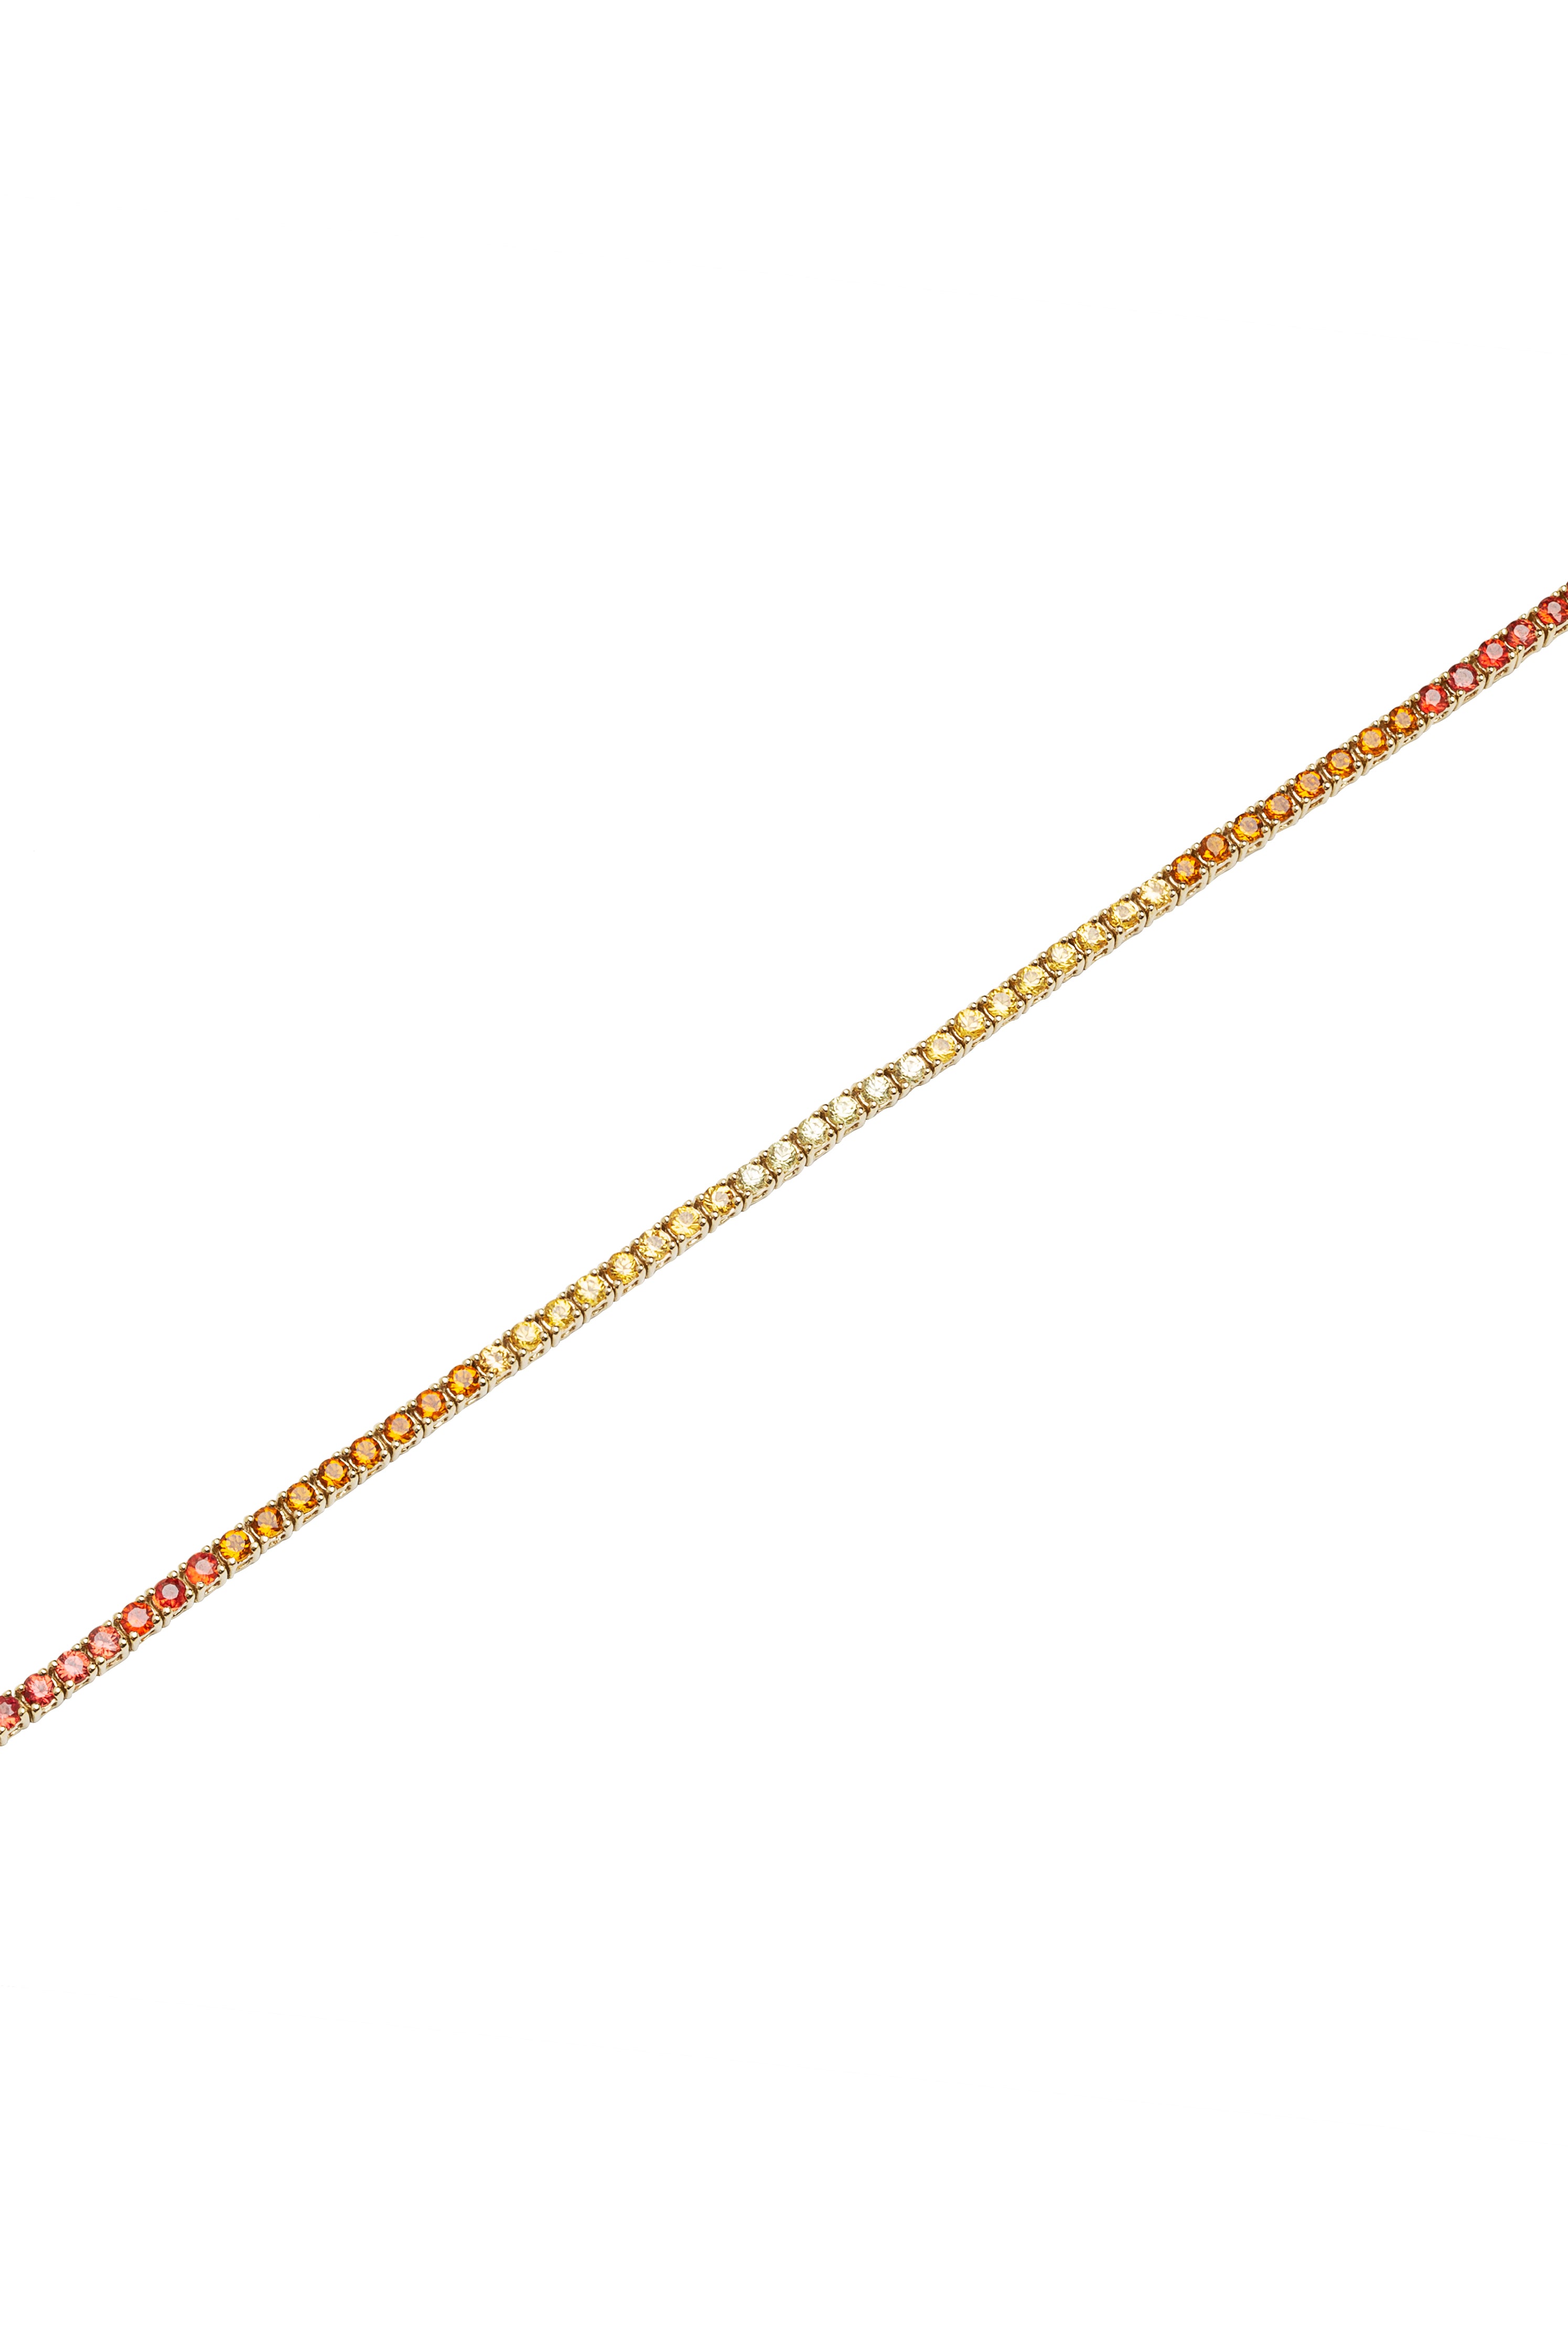 Pop yellow and orange sapphire bracelet, 14k solid yellow gold. The quintessential tennis bracelet with a bright sunny twist!  International shipping available.